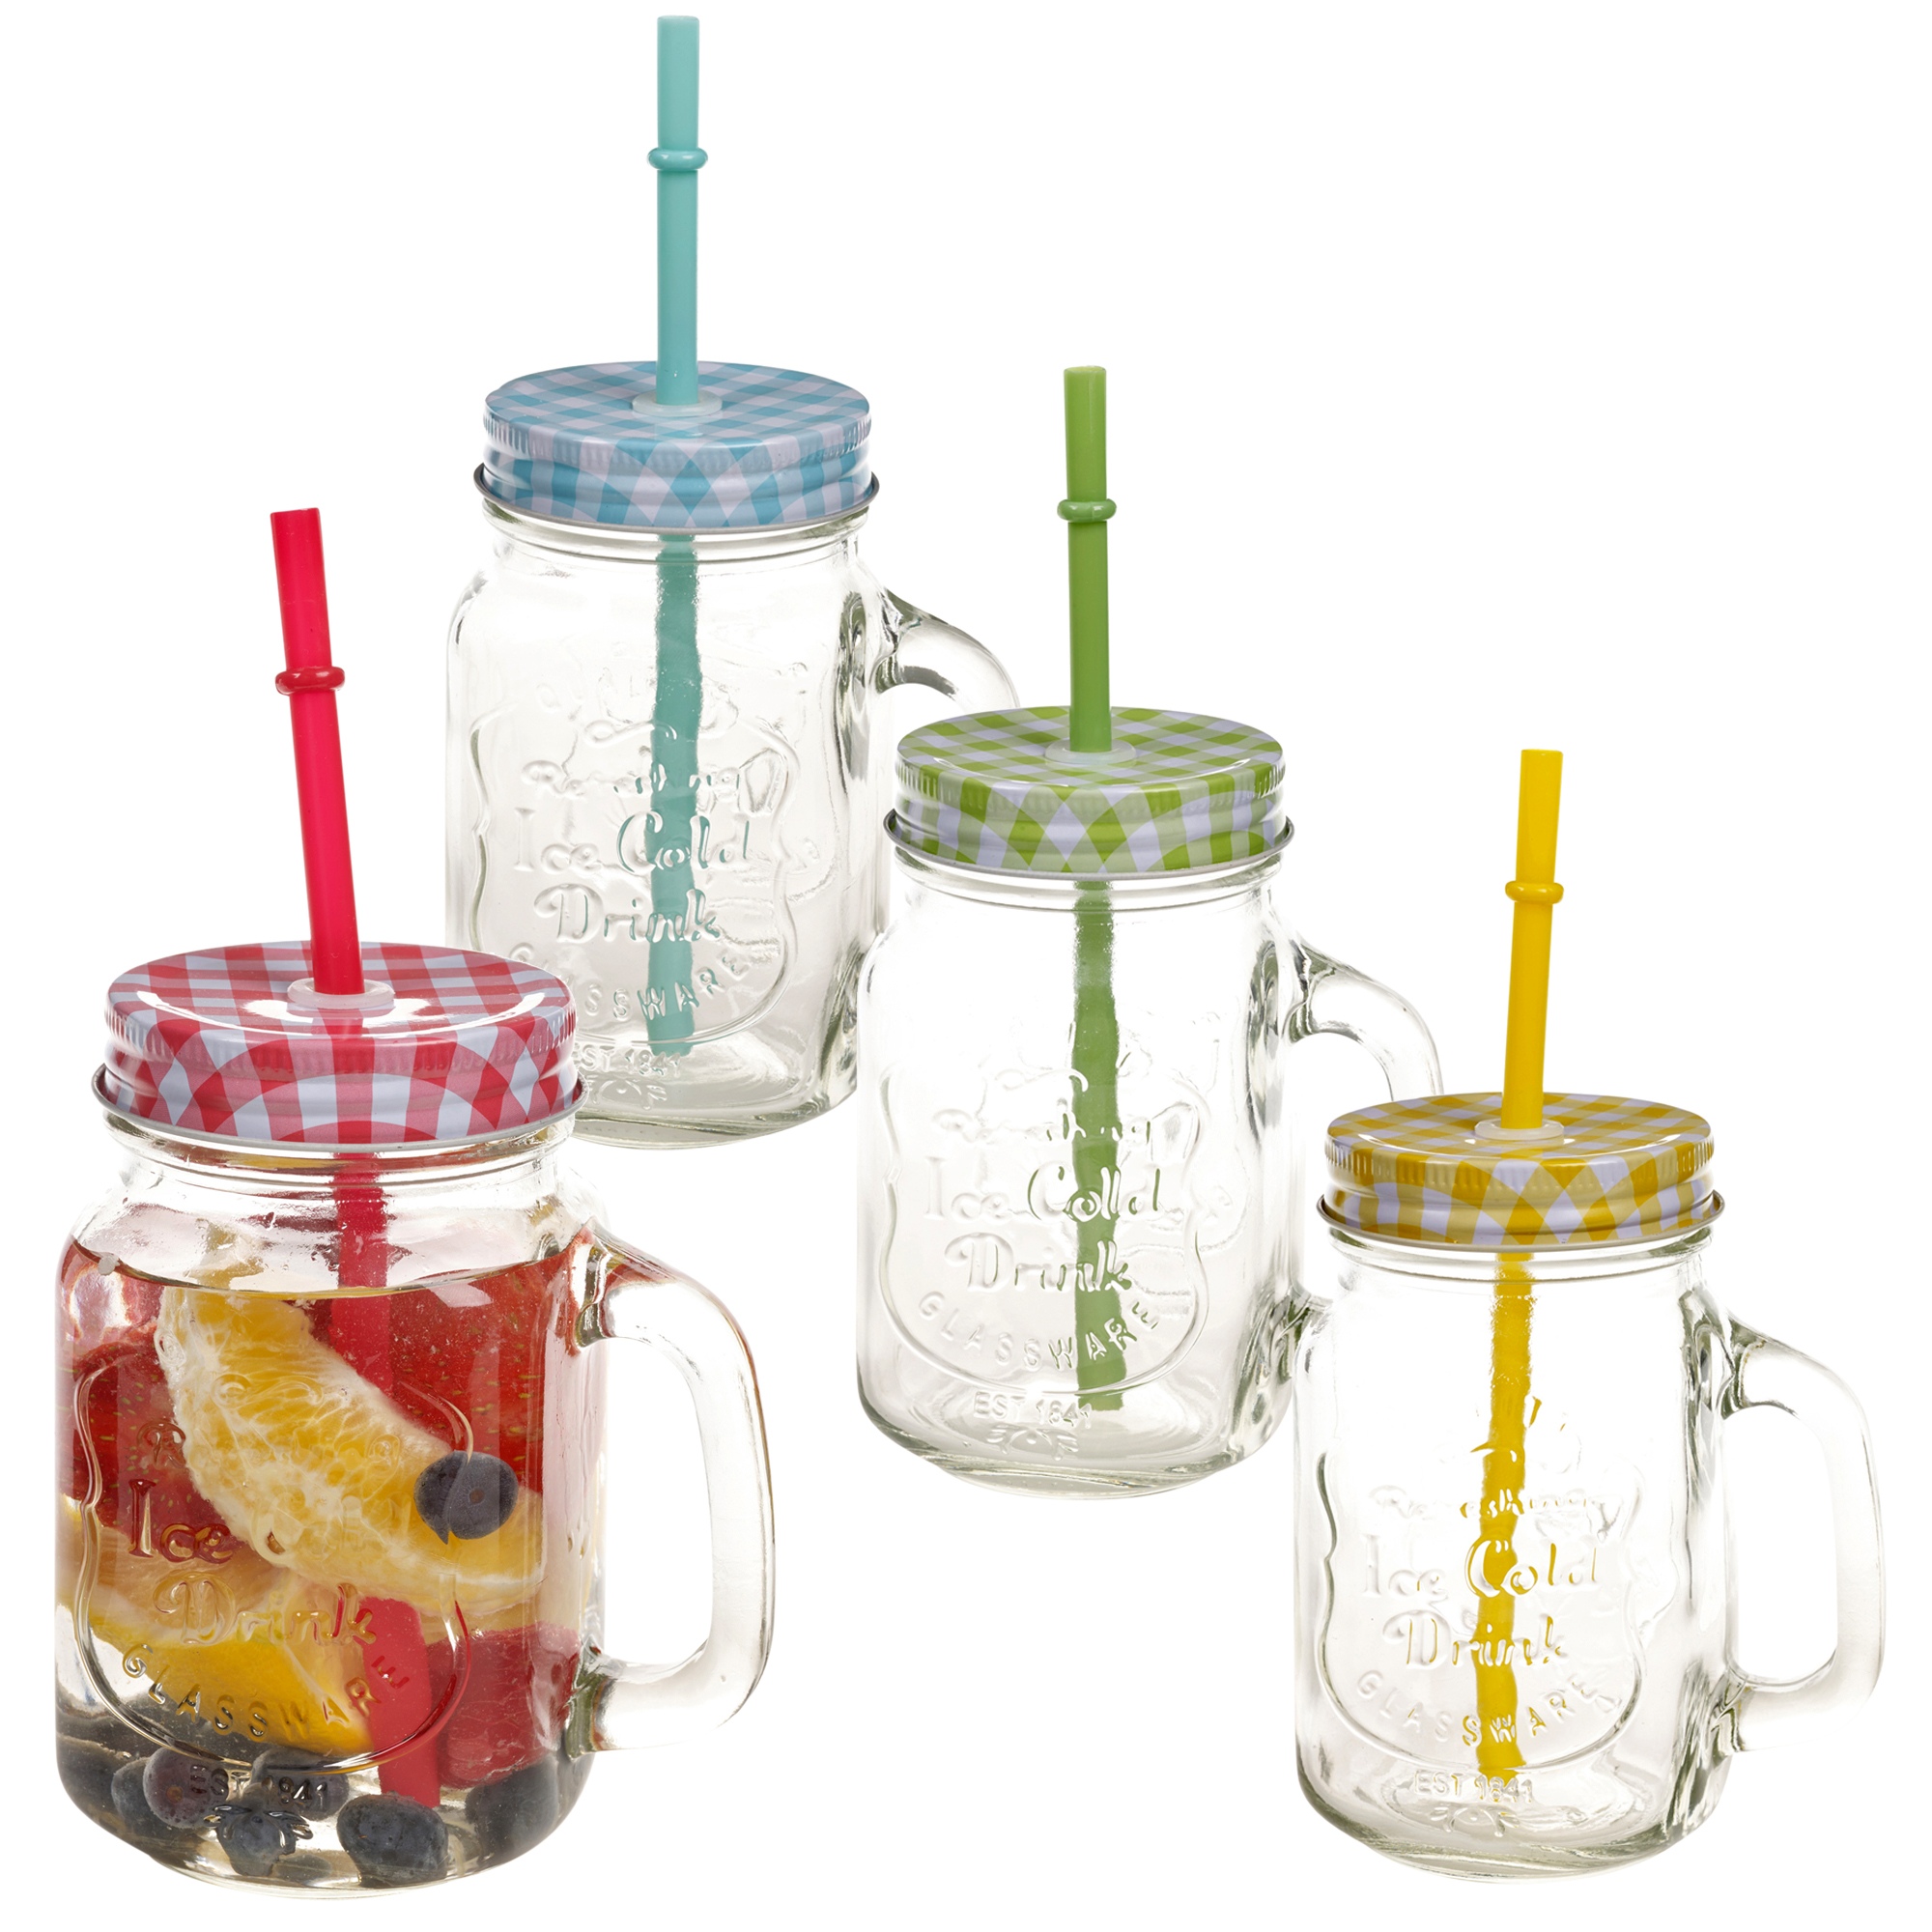 New Set 6 Retro Clear Glass Mason Jar Drinking Mugs With Handle Straws Screw Lid Food And Kitchen